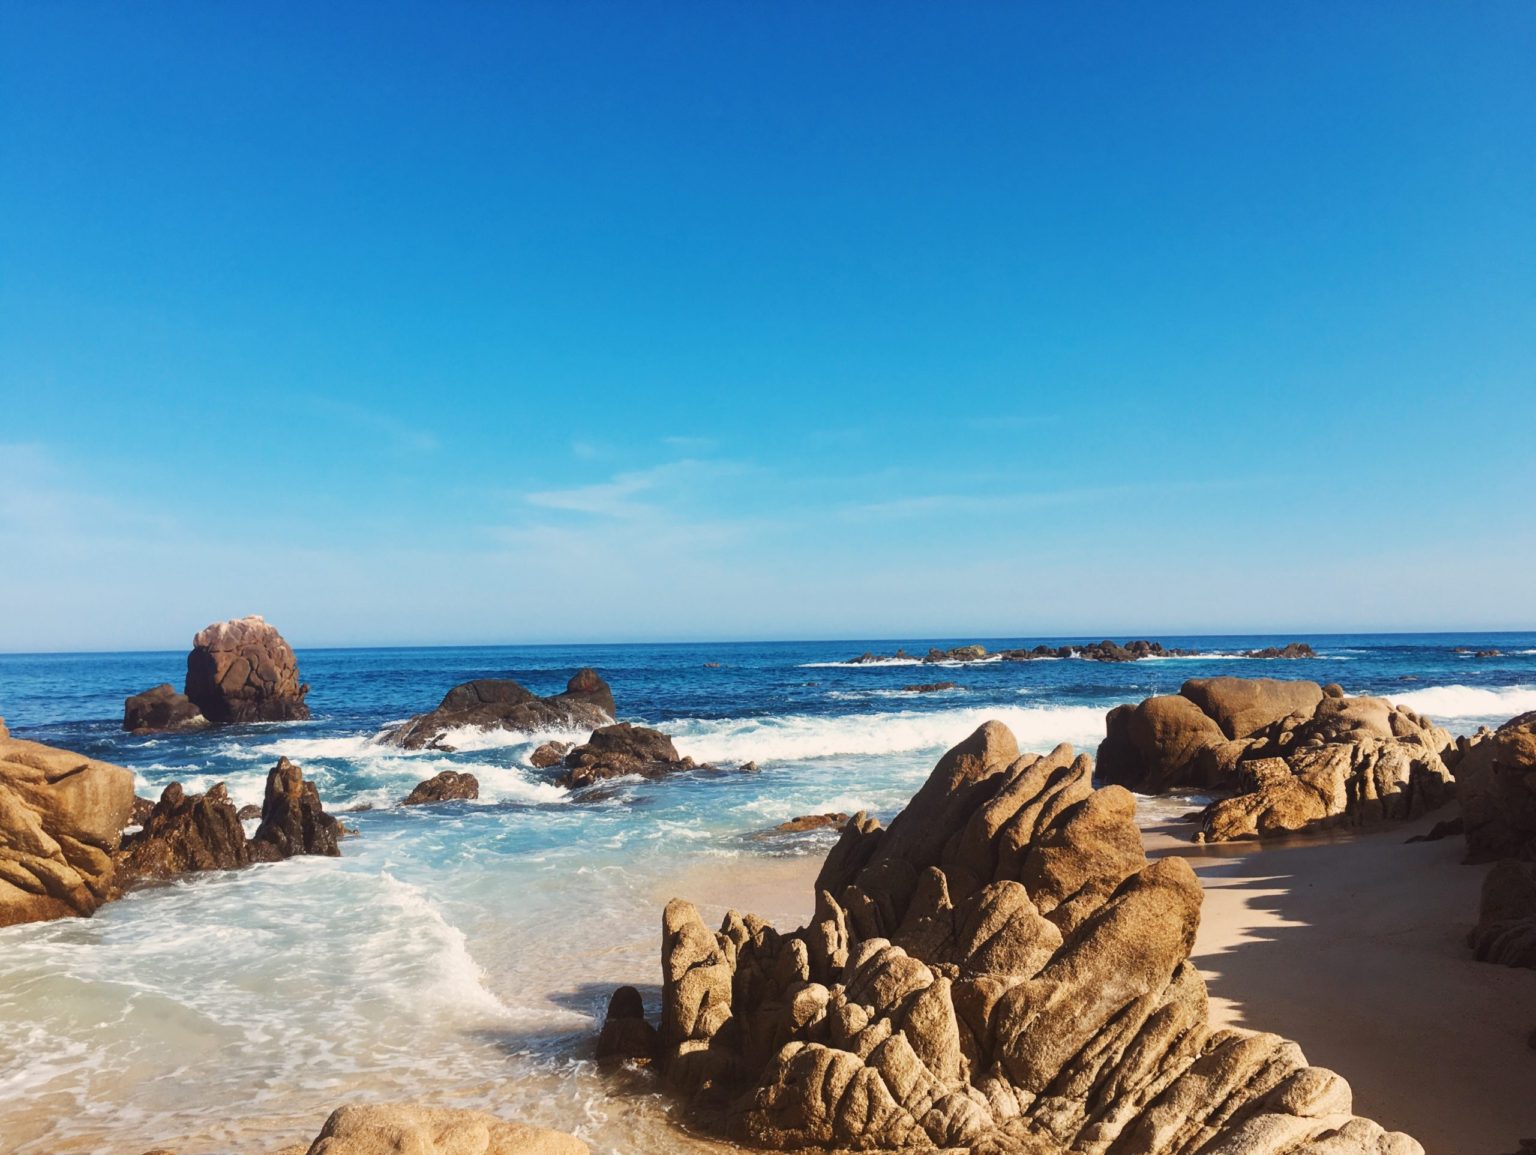 OUR TRIP TO PICK A WEDDING VENUE IN CABO